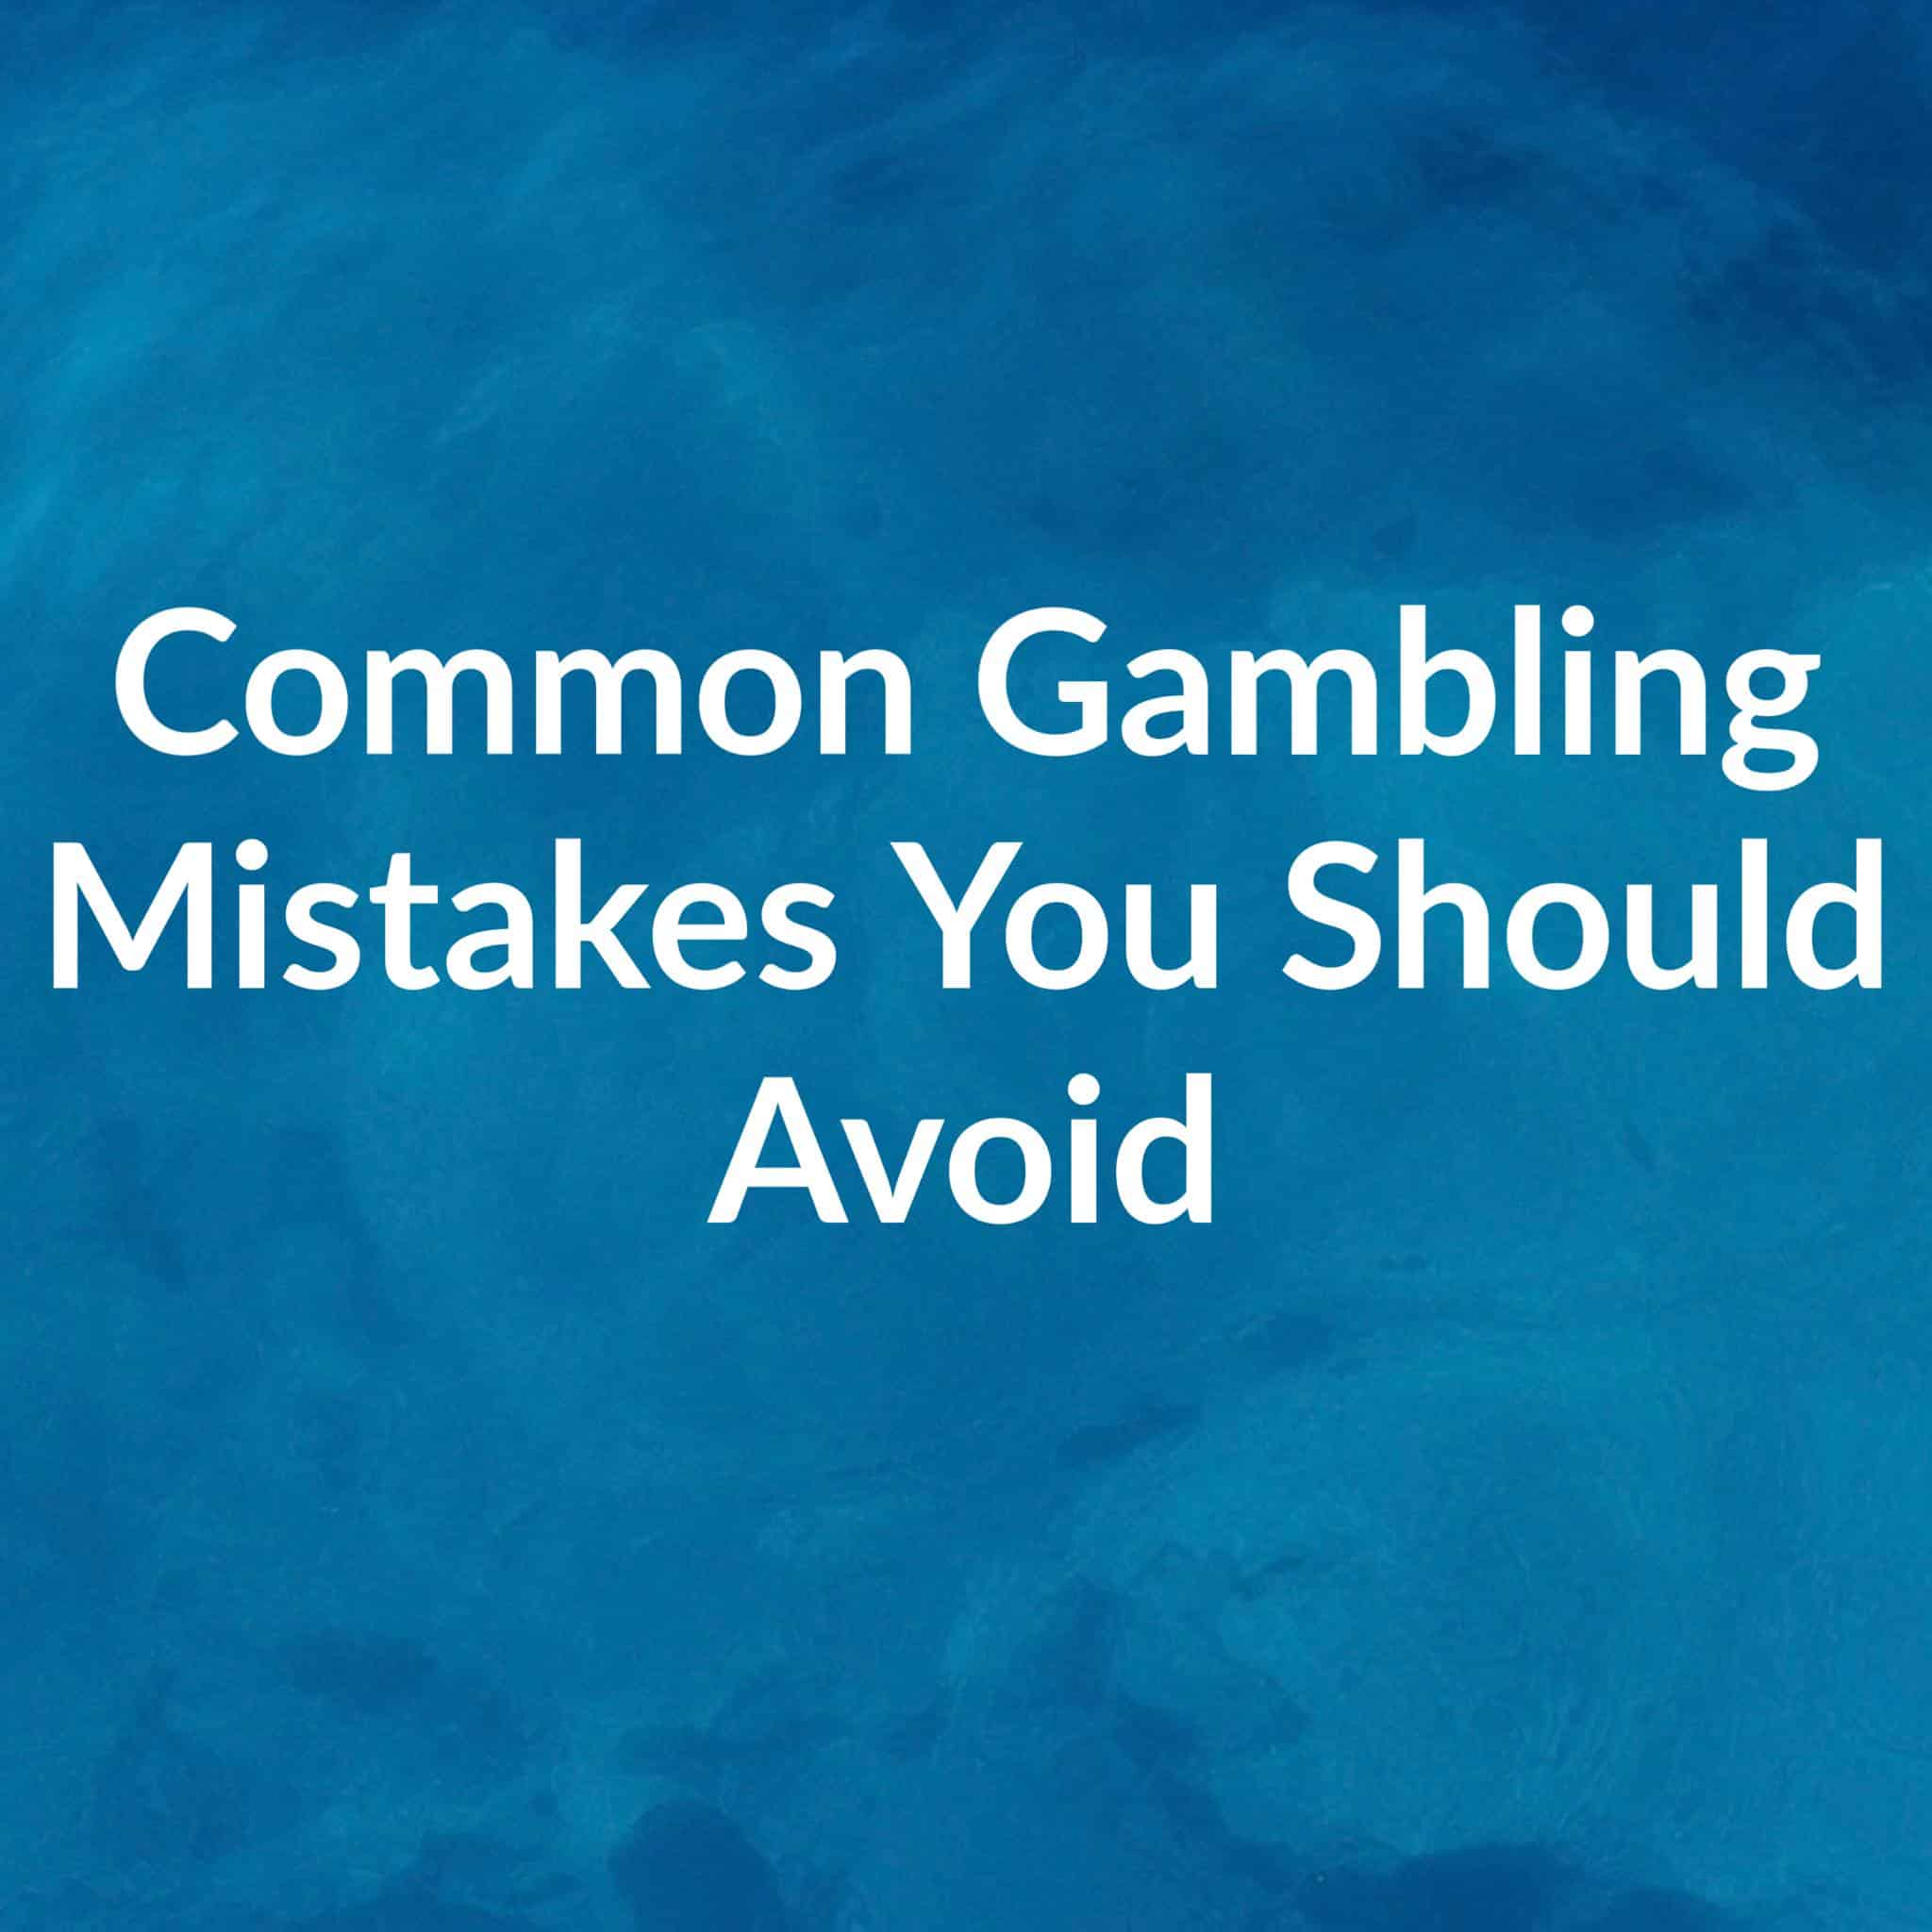 commom gambling mistakes you should avoid